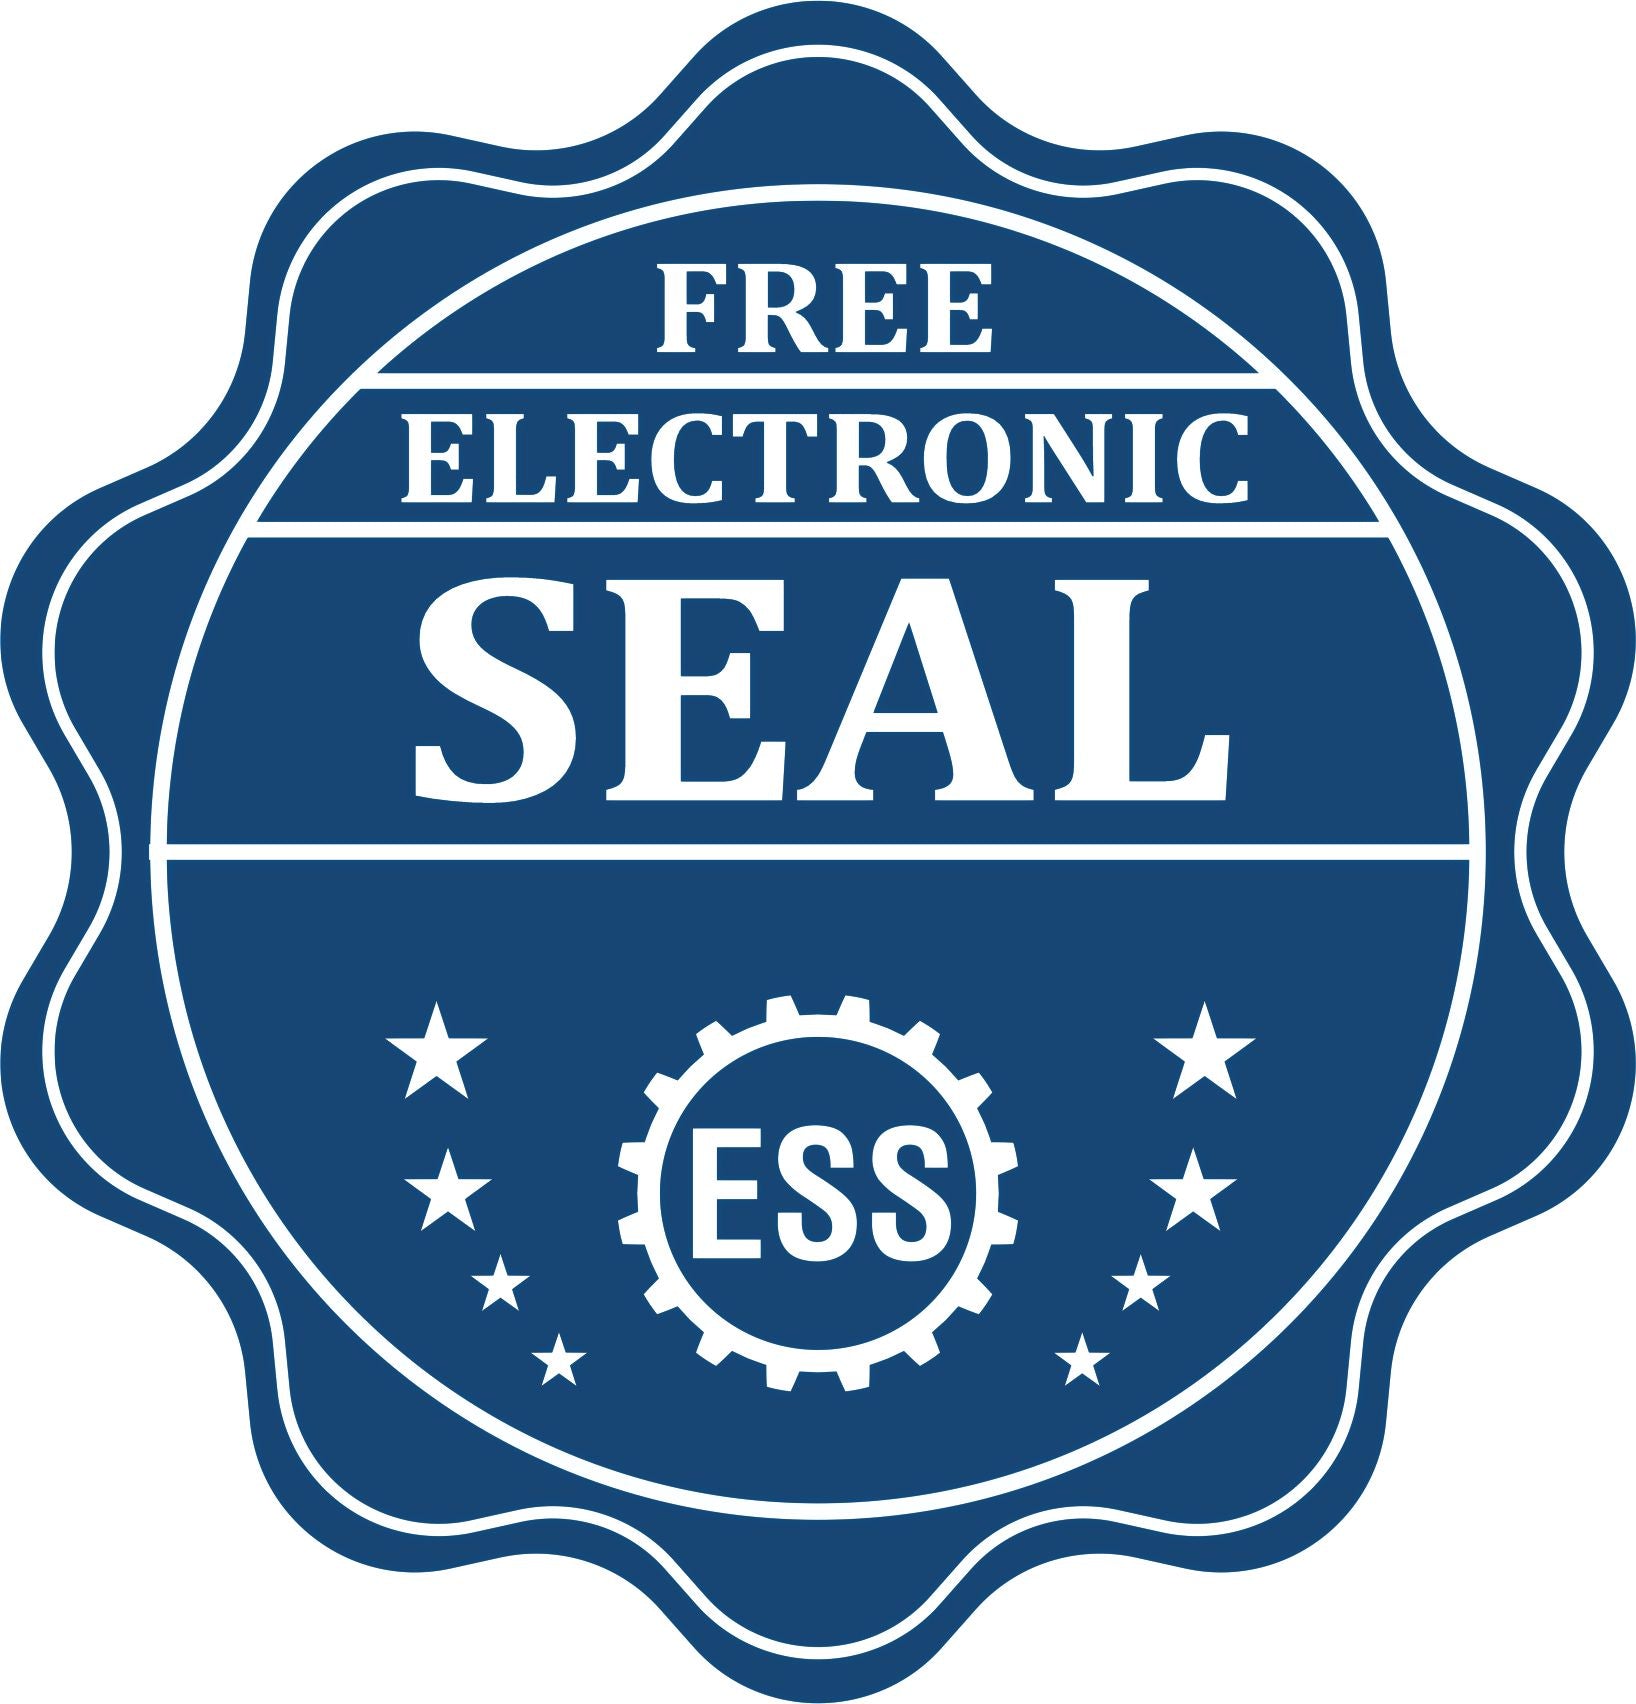 A badge showing a free electronic seal for the Handheld Mississippi Professional Engineer Embosser with stars and the ESS gear on the emblem.